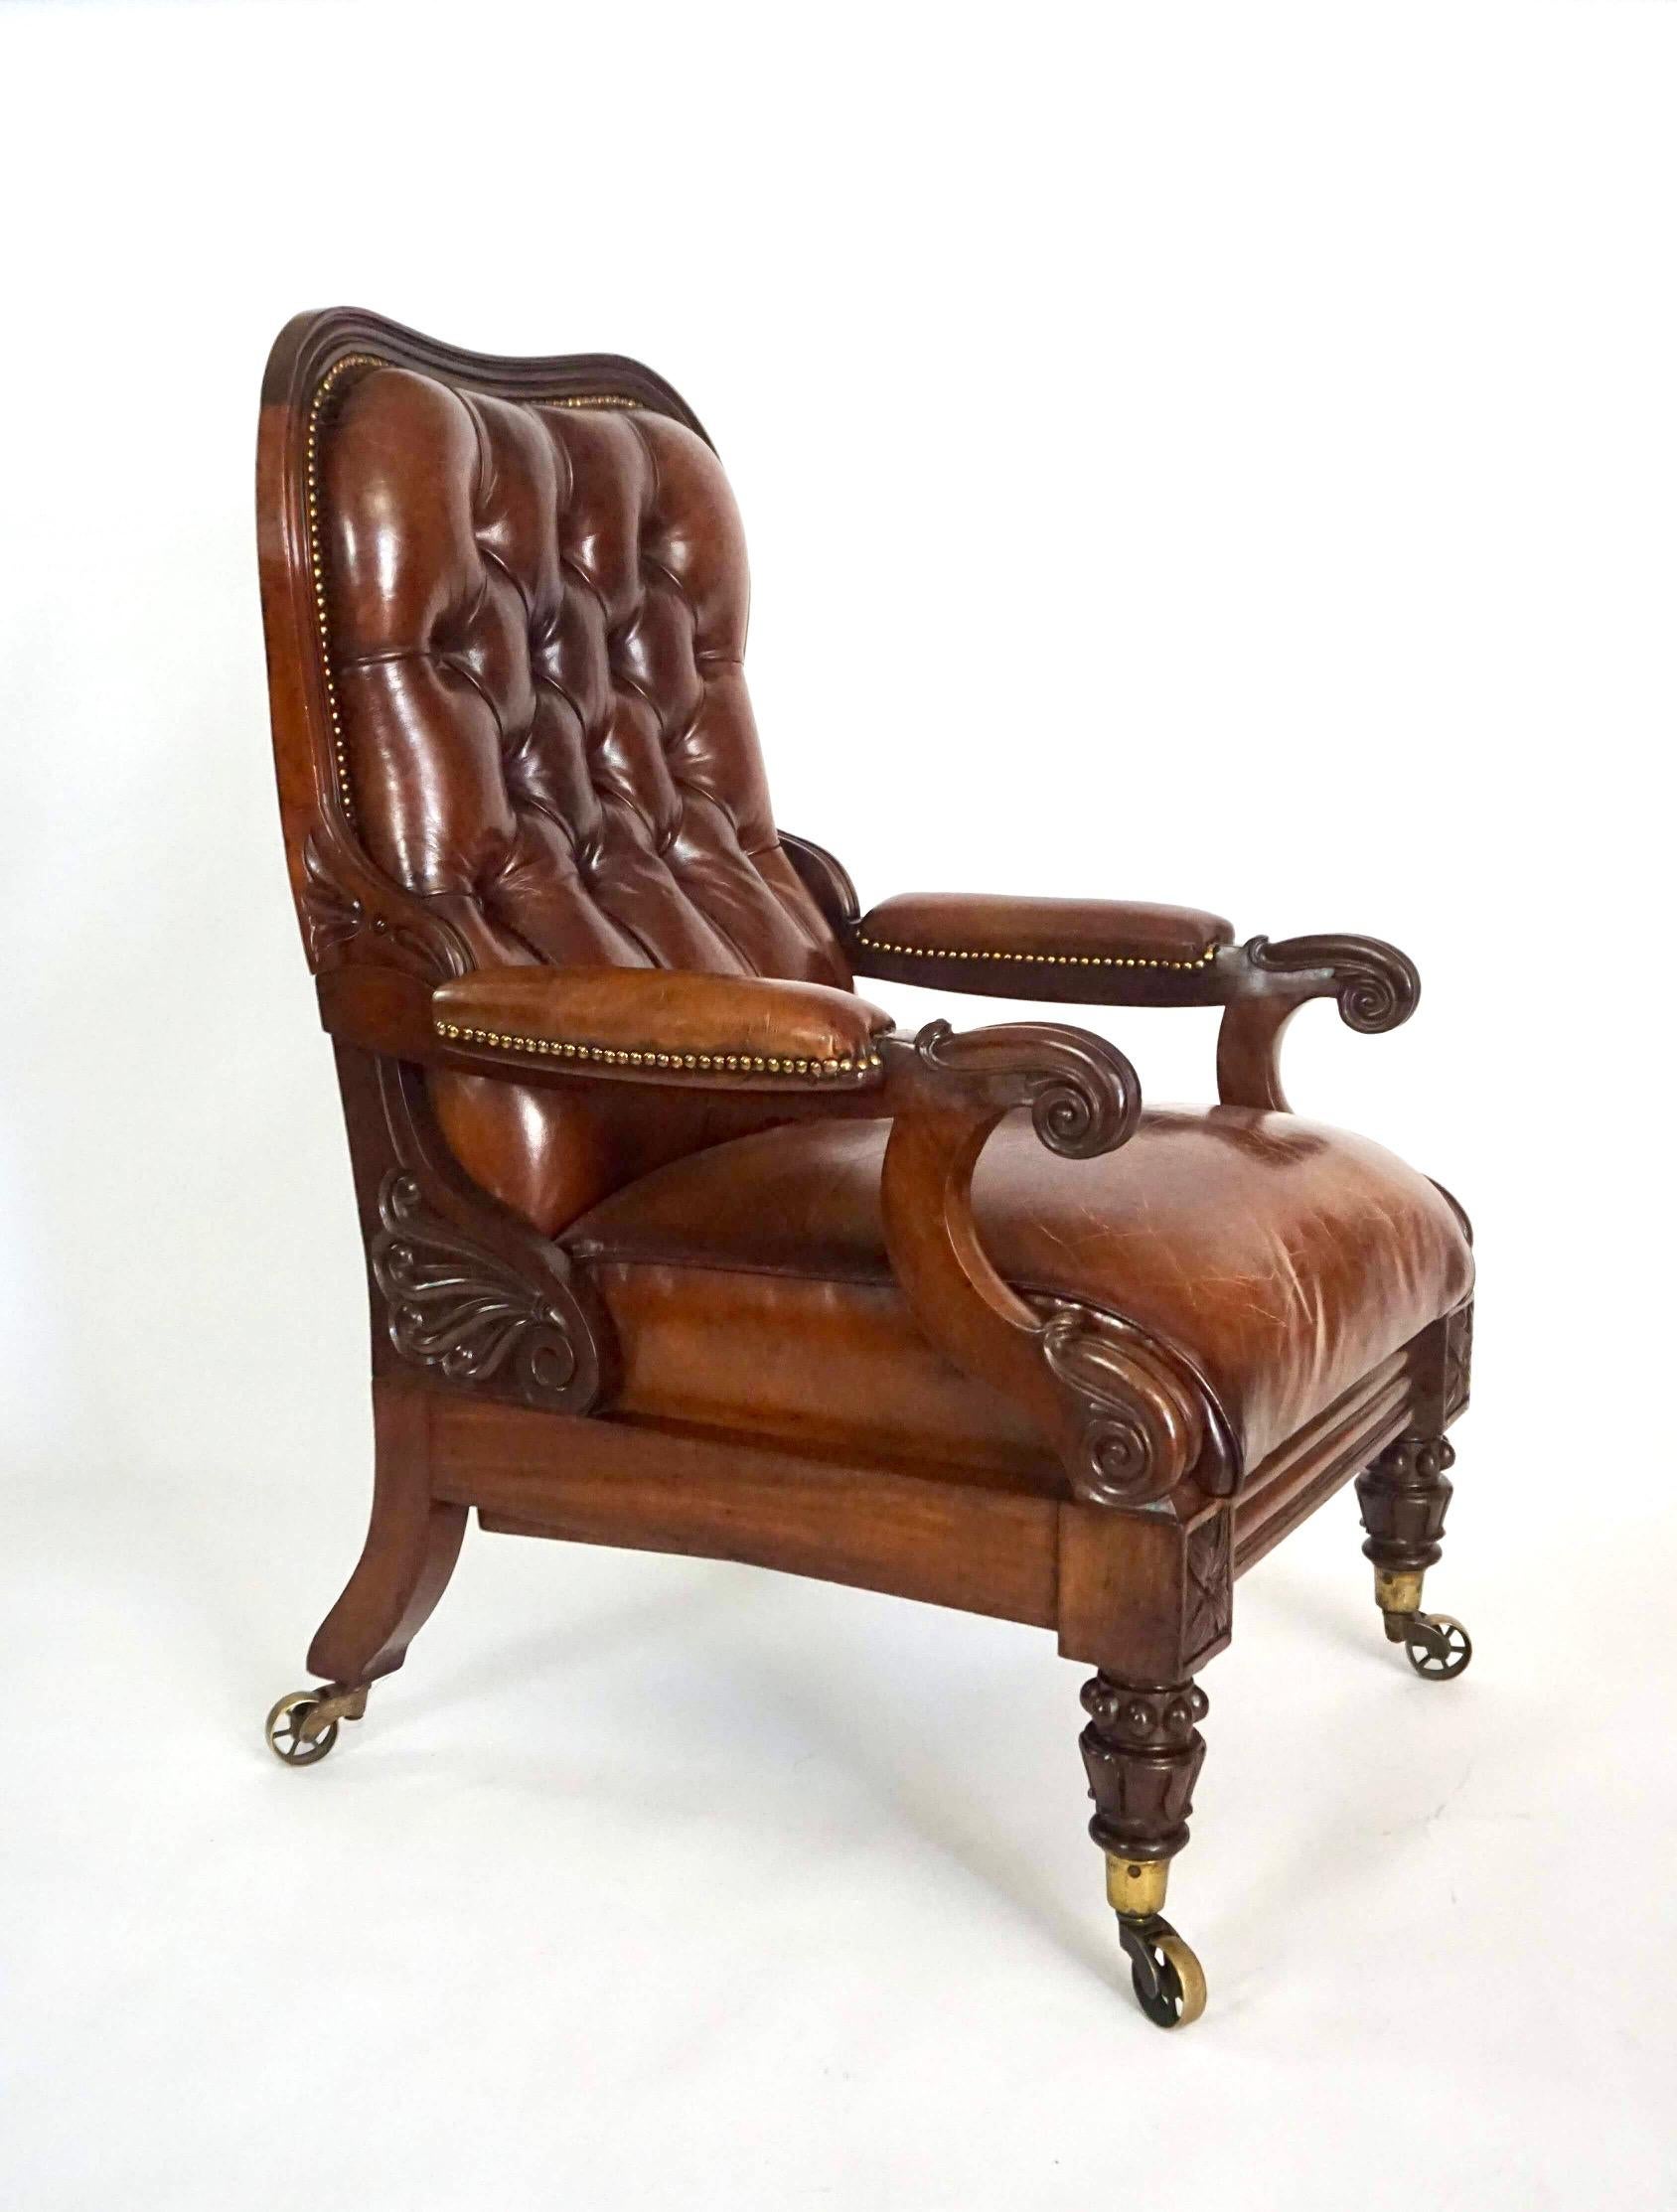 A remarkable circa 1830 English, possibly Irish, late regency style George IV; William IV period reclining armchair of large scale having leather upholstered carved mahogany frame, the reclining tufted back with serpentine molded crestrail and